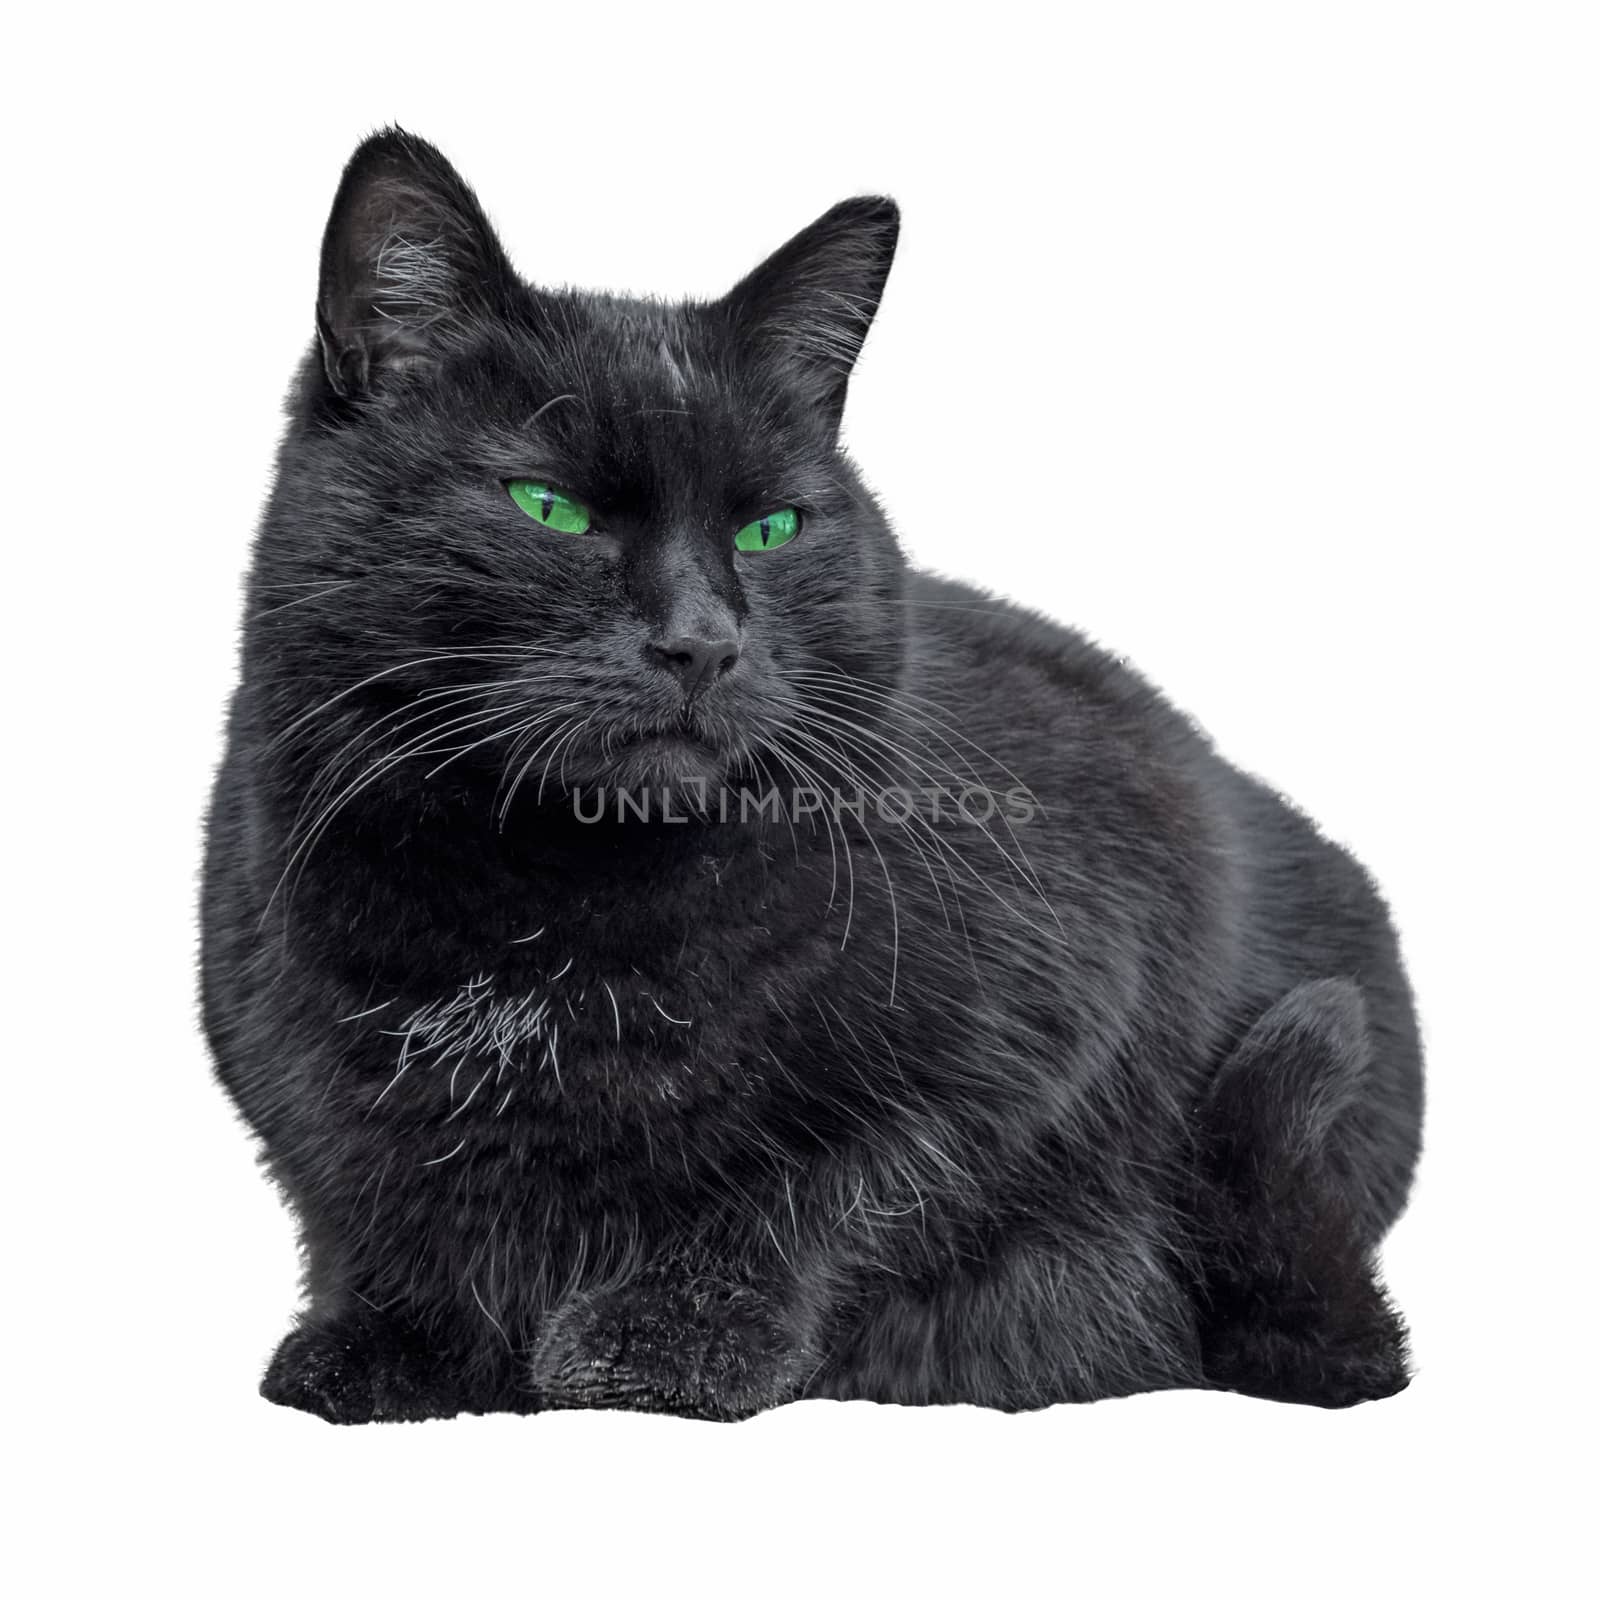 Black cat sitting and looking, isolated on white